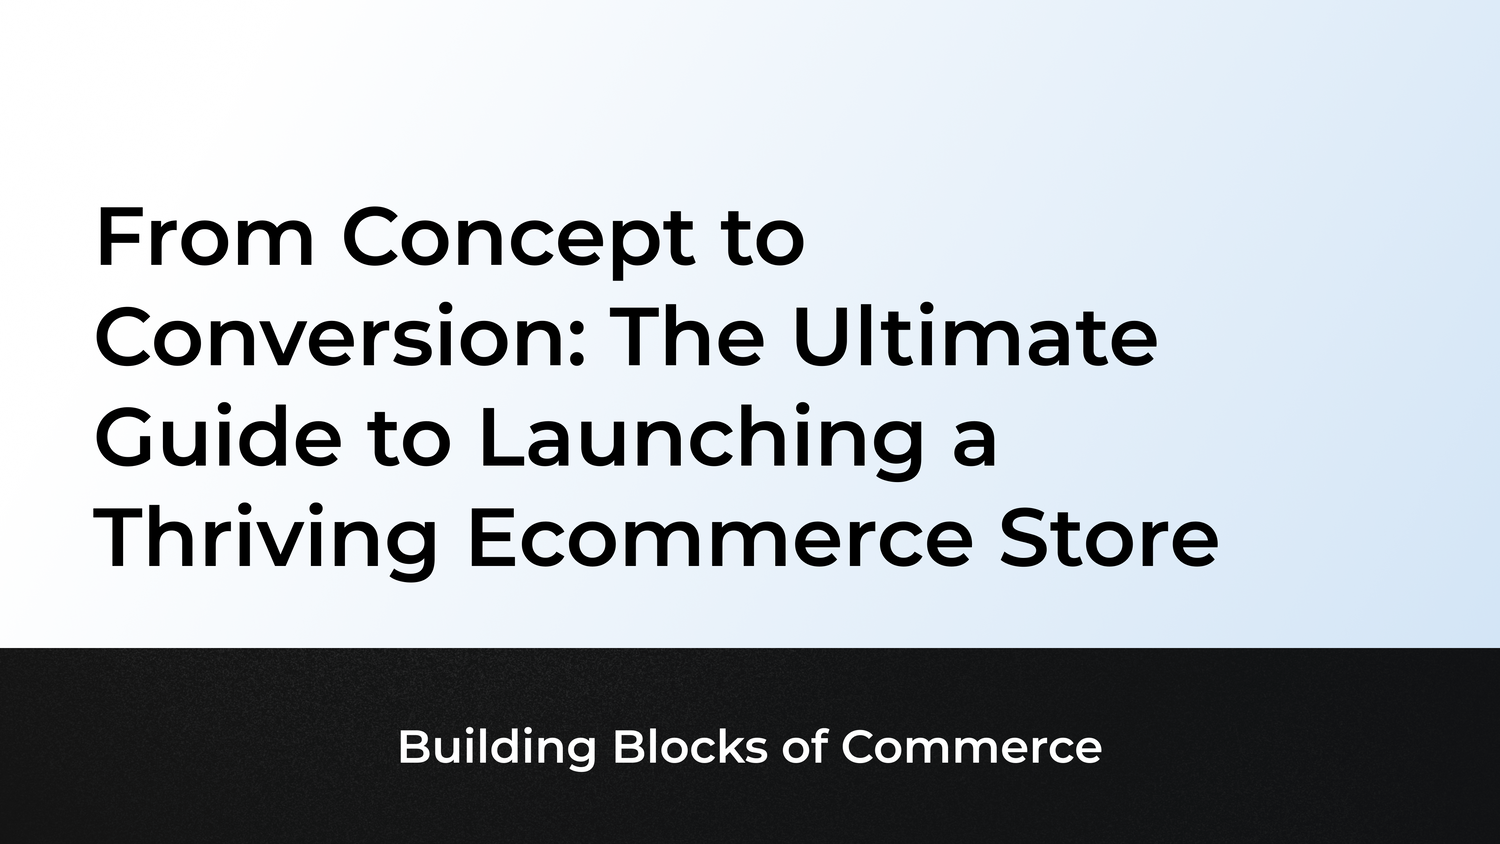 From Concept to Conversion: The Ultimate Guide to Launching a Thriving Ecommerce Store